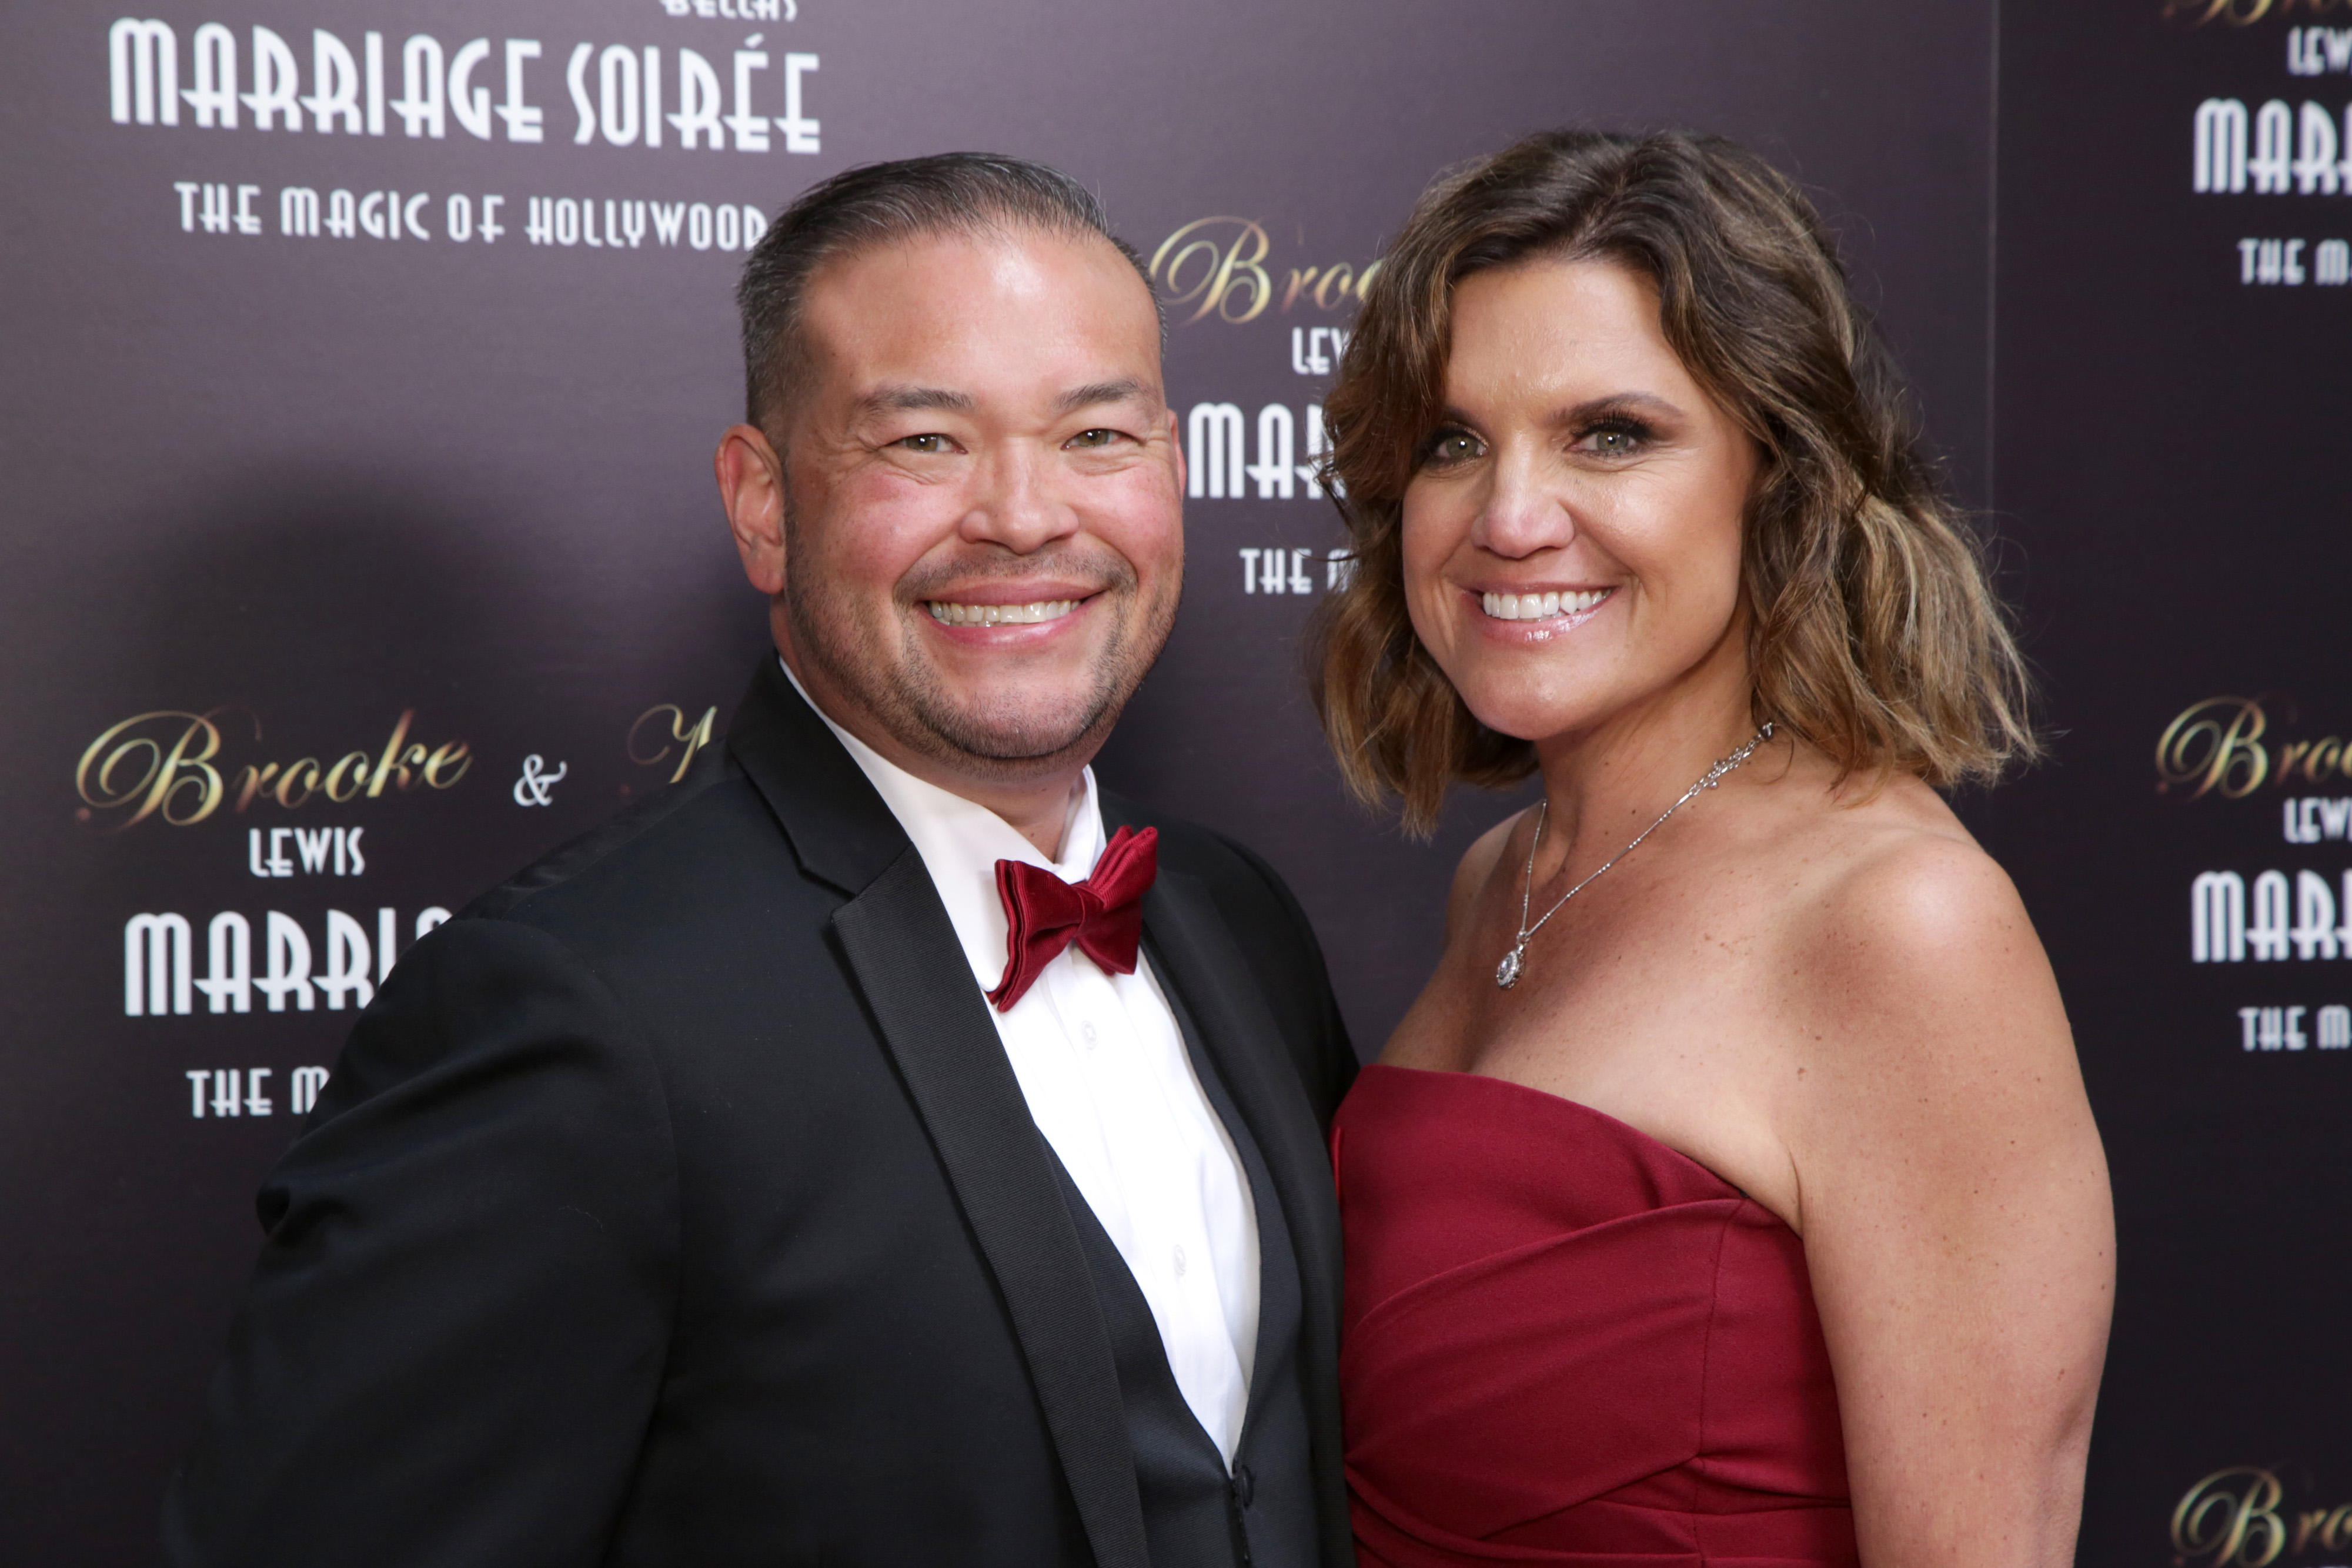 Jon Gosselin and Colleen Conrad attend Brooke & Mark's Marriage Soiree, 'The Magic Of Hollywood'